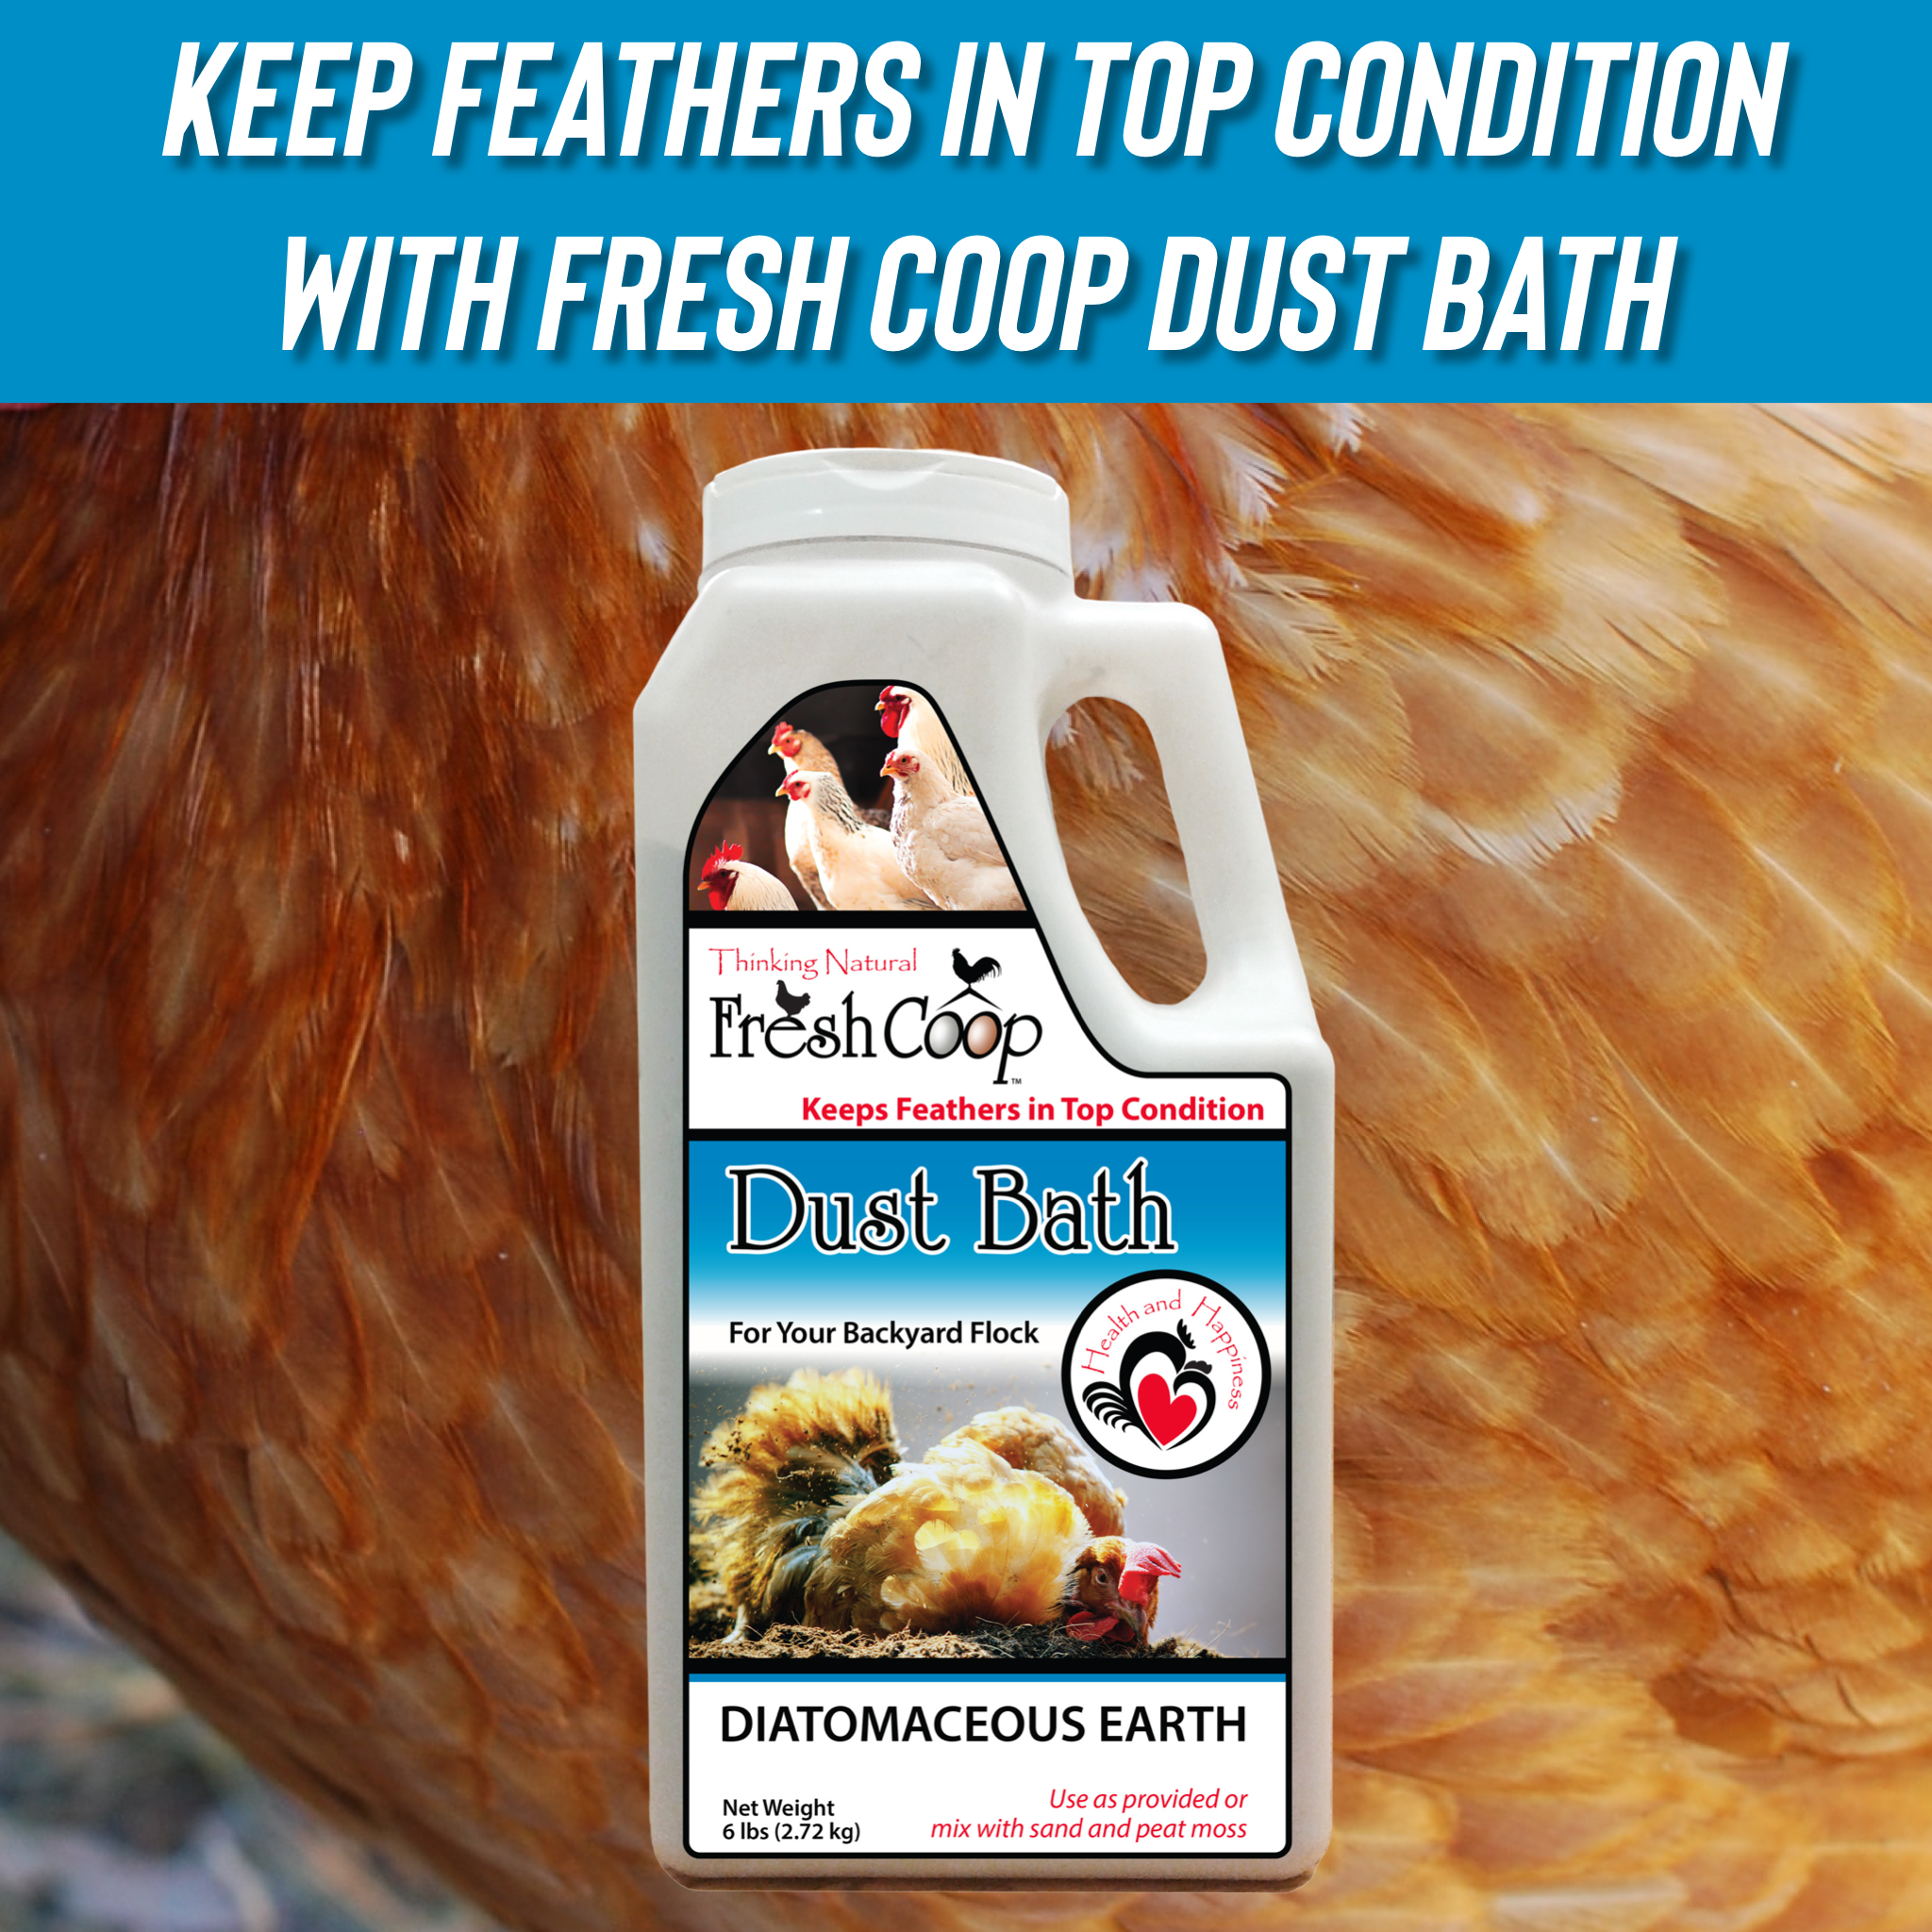 Absorbent Dust Bath for Backyard Chickens w/ FREE Chick Fresh 24 oz | Control and Eliminate odors